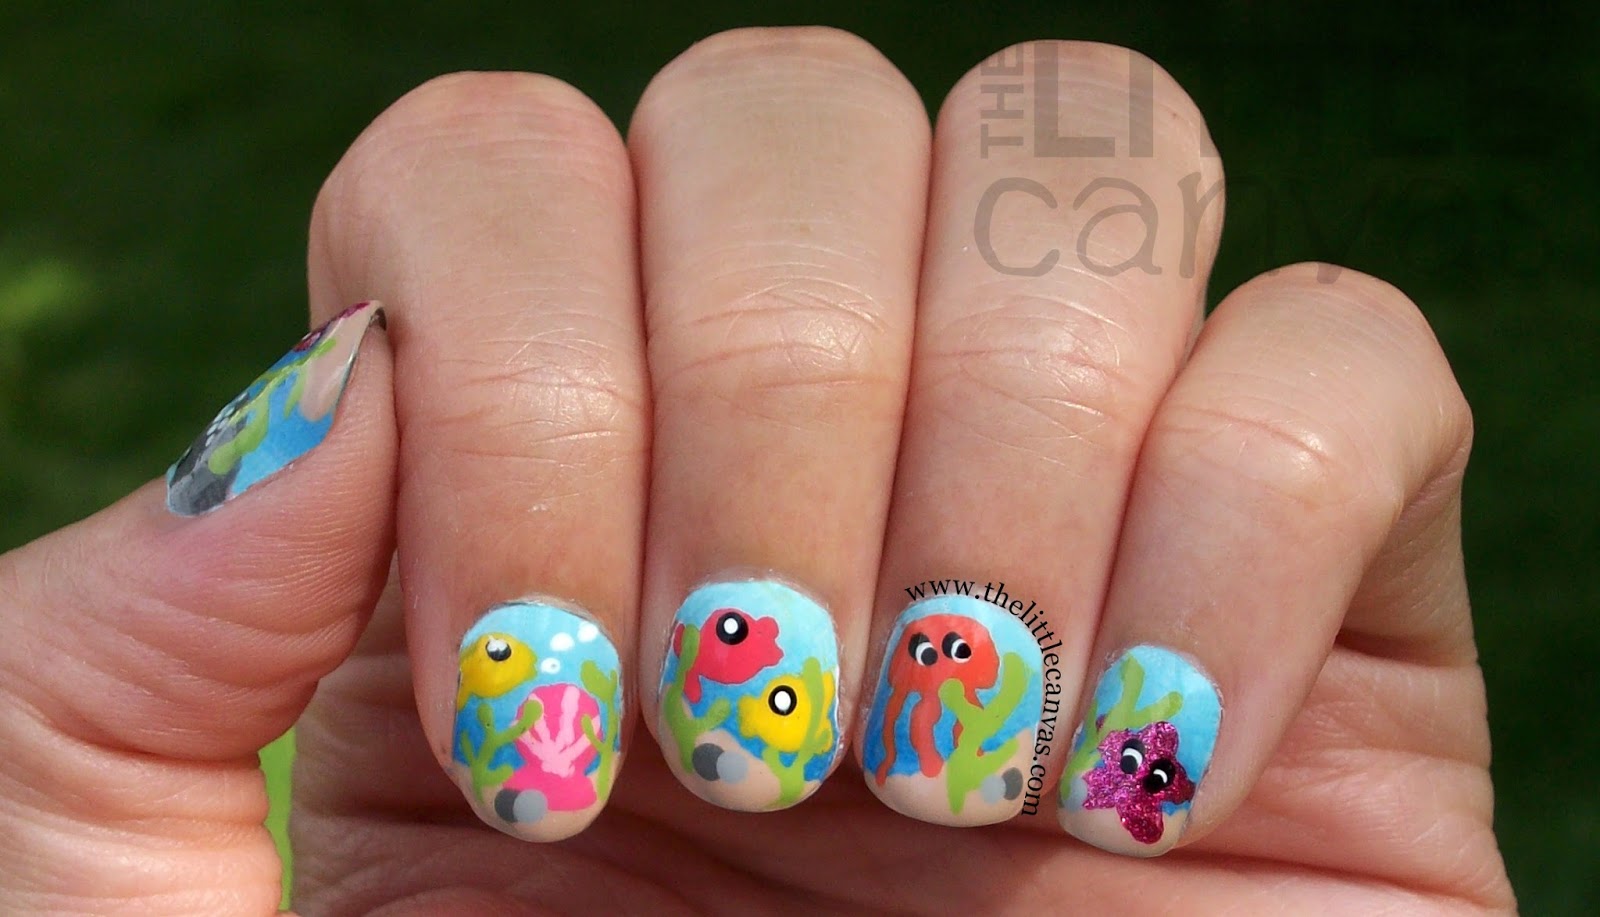 Sea Nail Art Images - wide 4